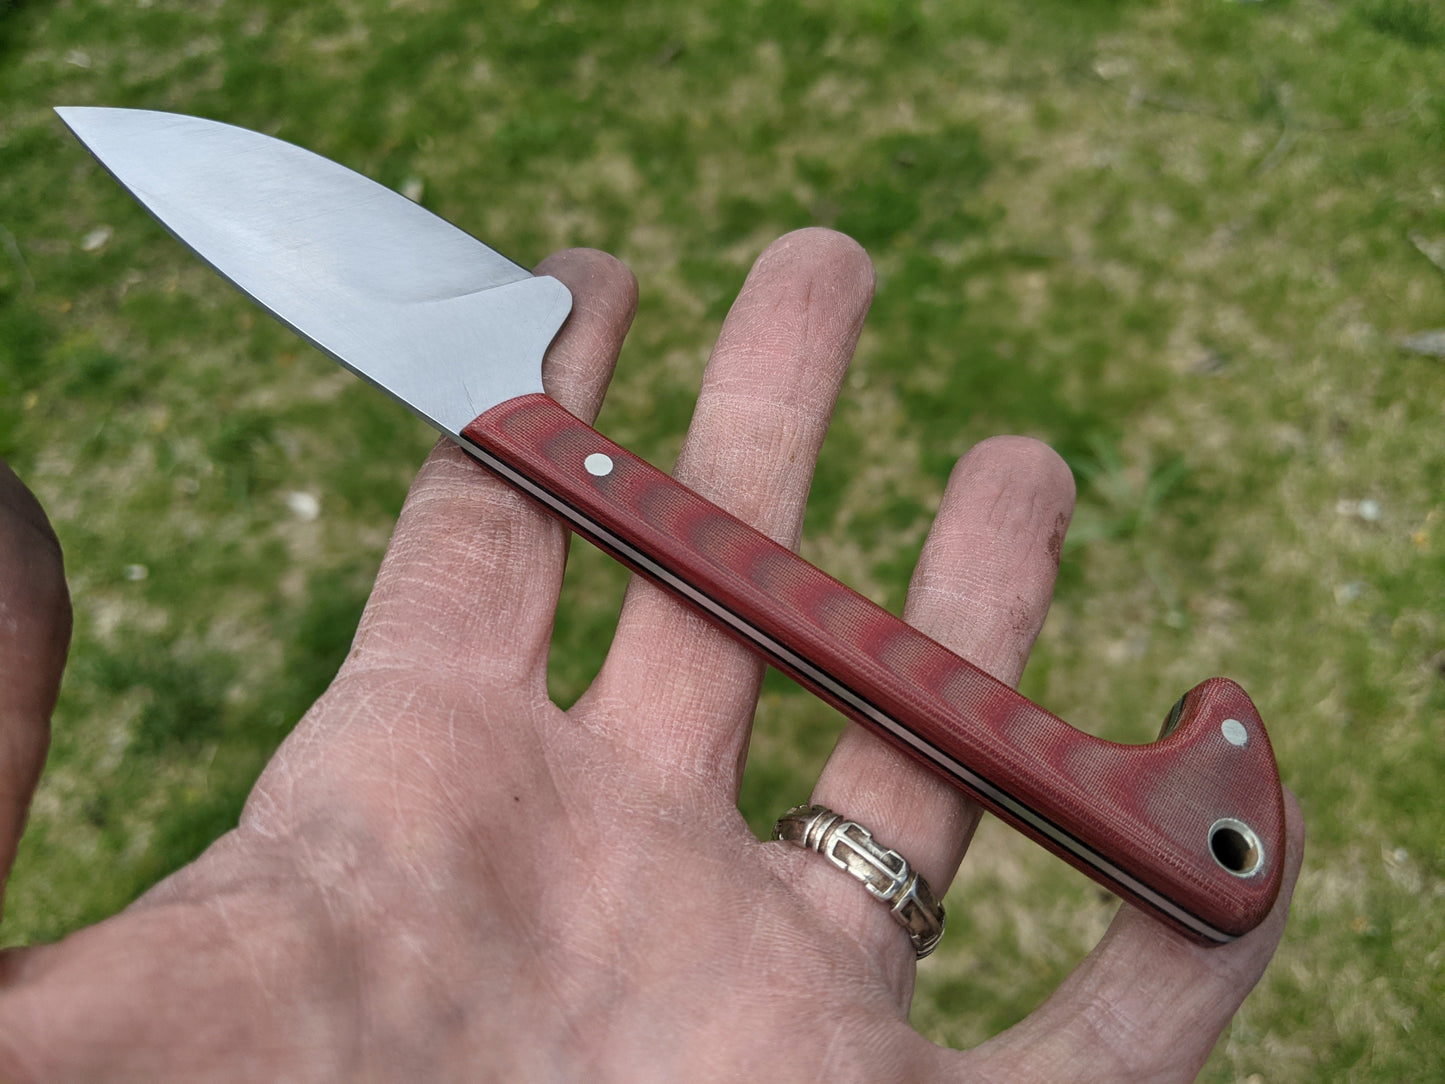 Small work knife with red micarta handle